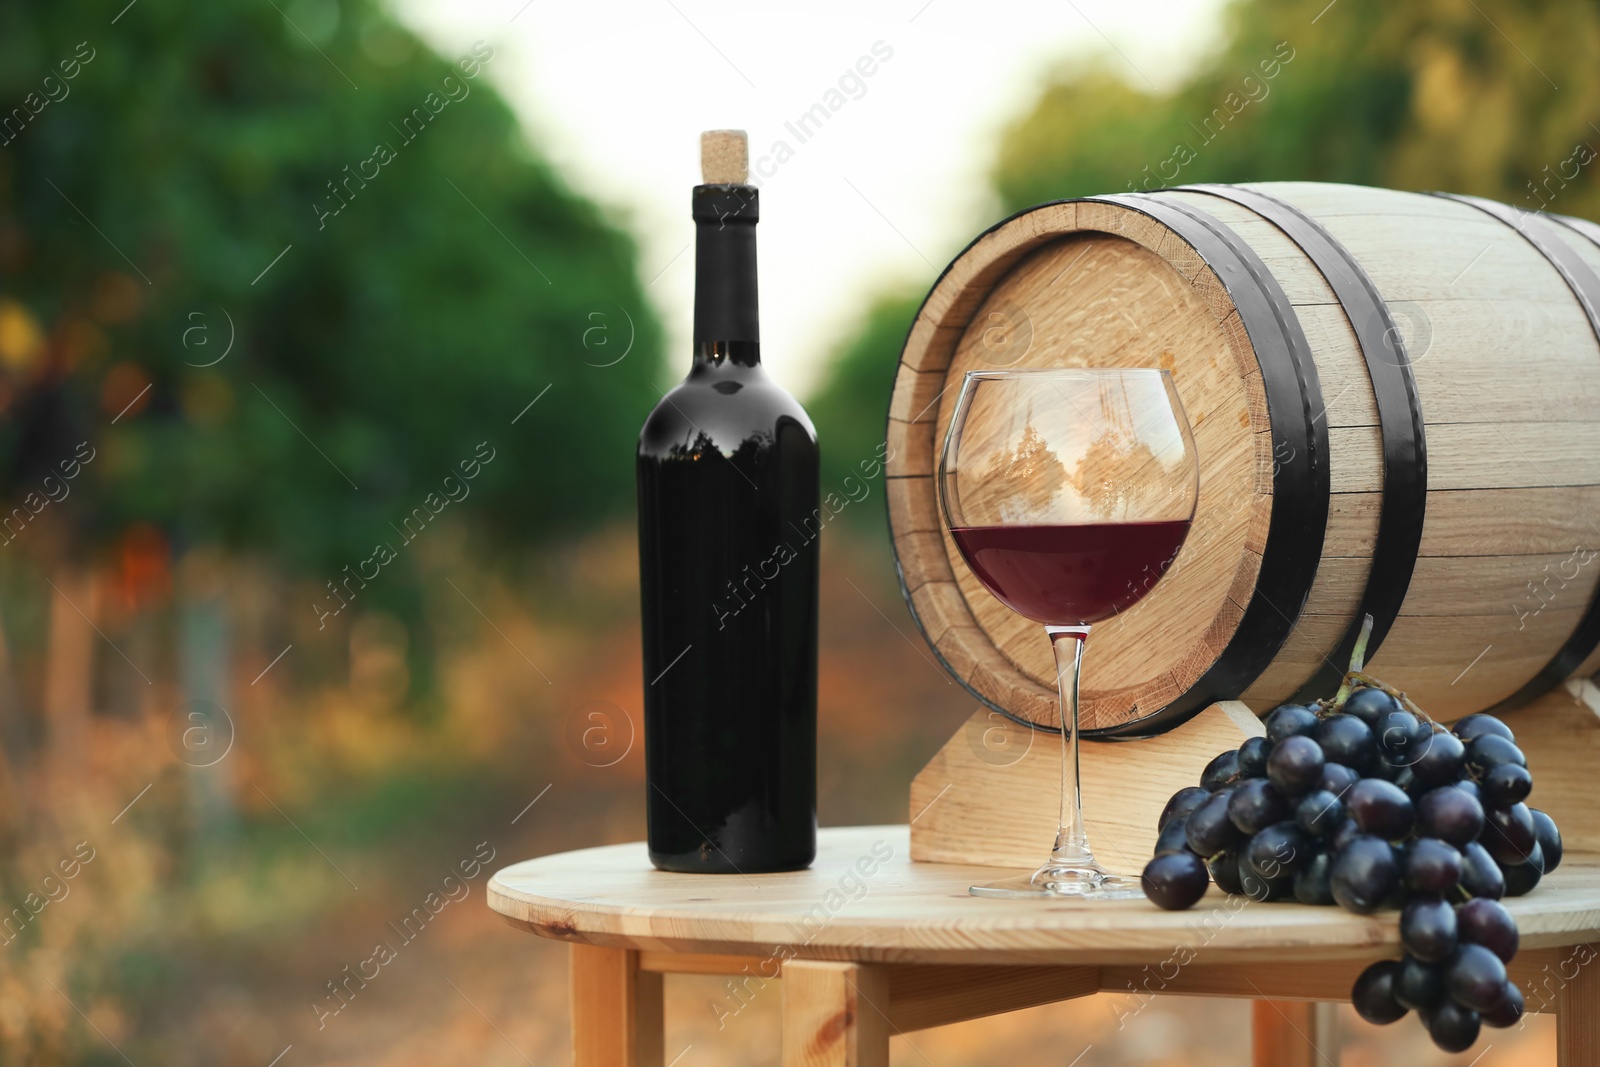 Photo of Bottle of wine, barrel and glass on wooden table in vineyard